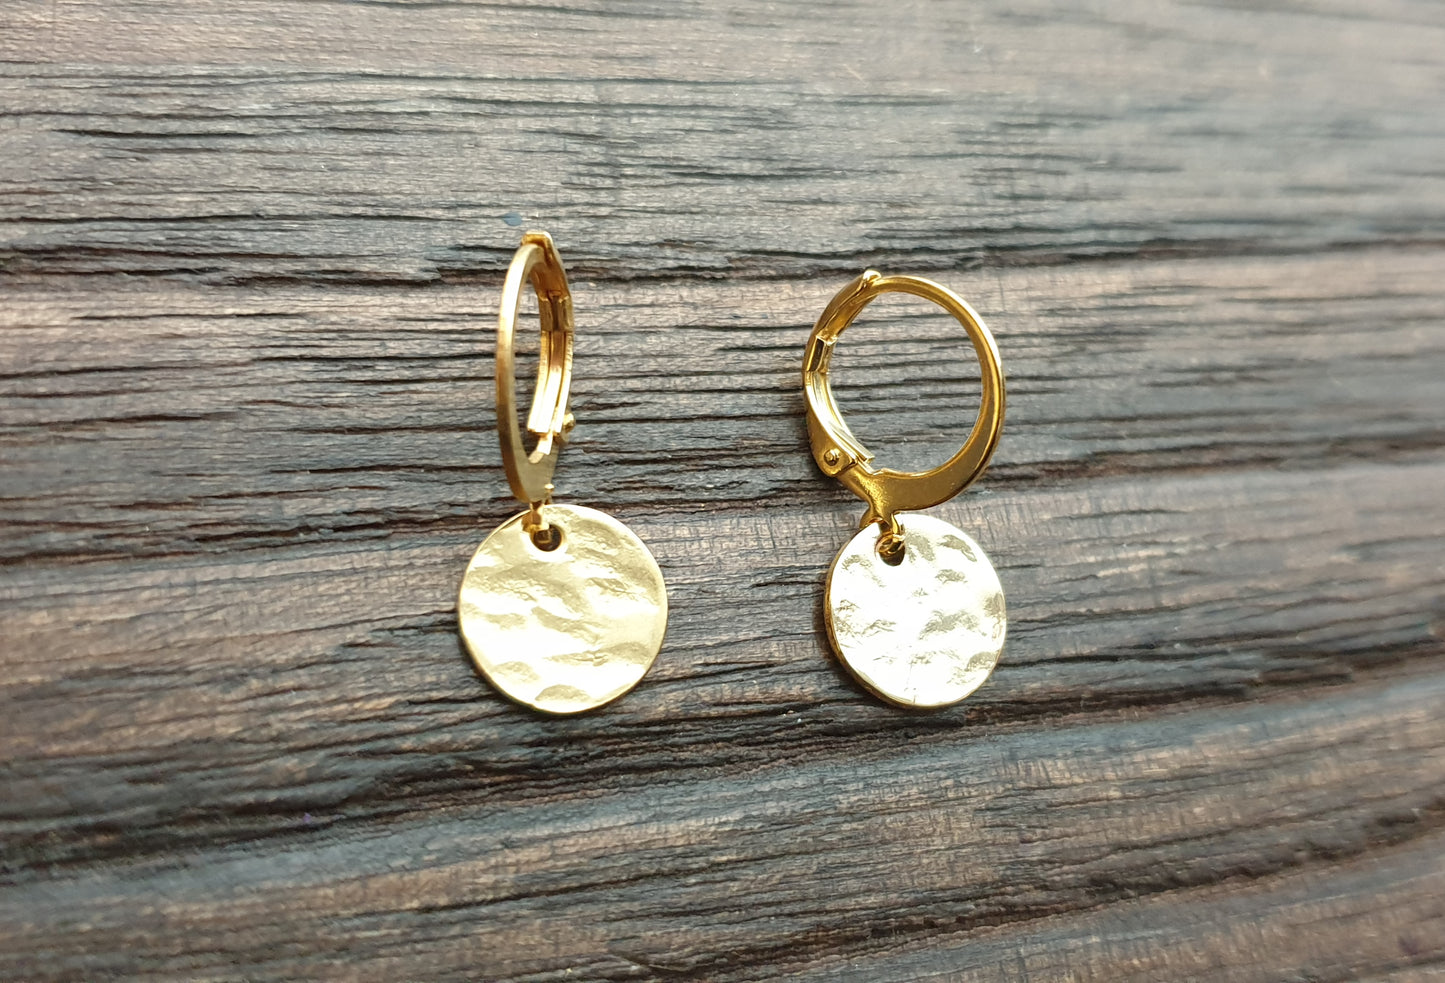 Gold Hammered Circle Disc Leverback Earrings, Stainless Steel Dangle Leverback